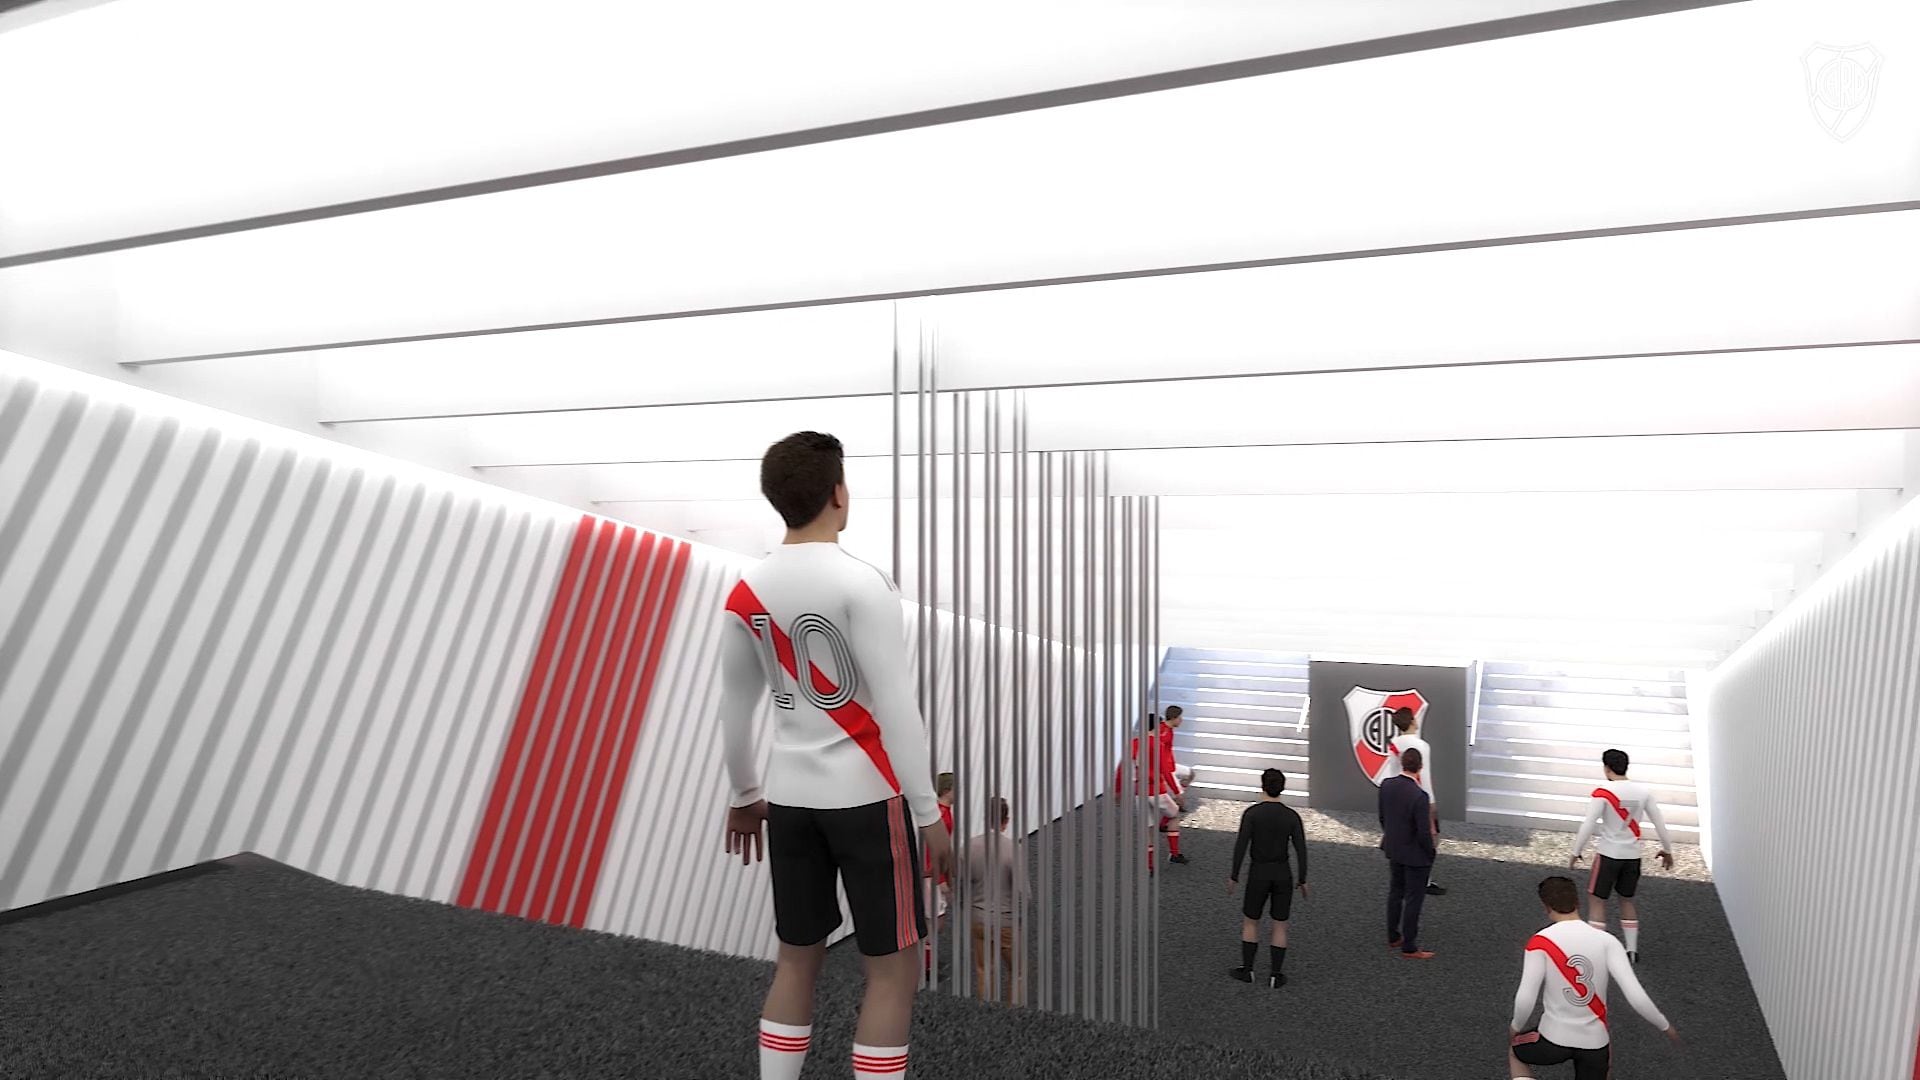 Remodelling of the Monumental Stadium for River Plate - IDOM